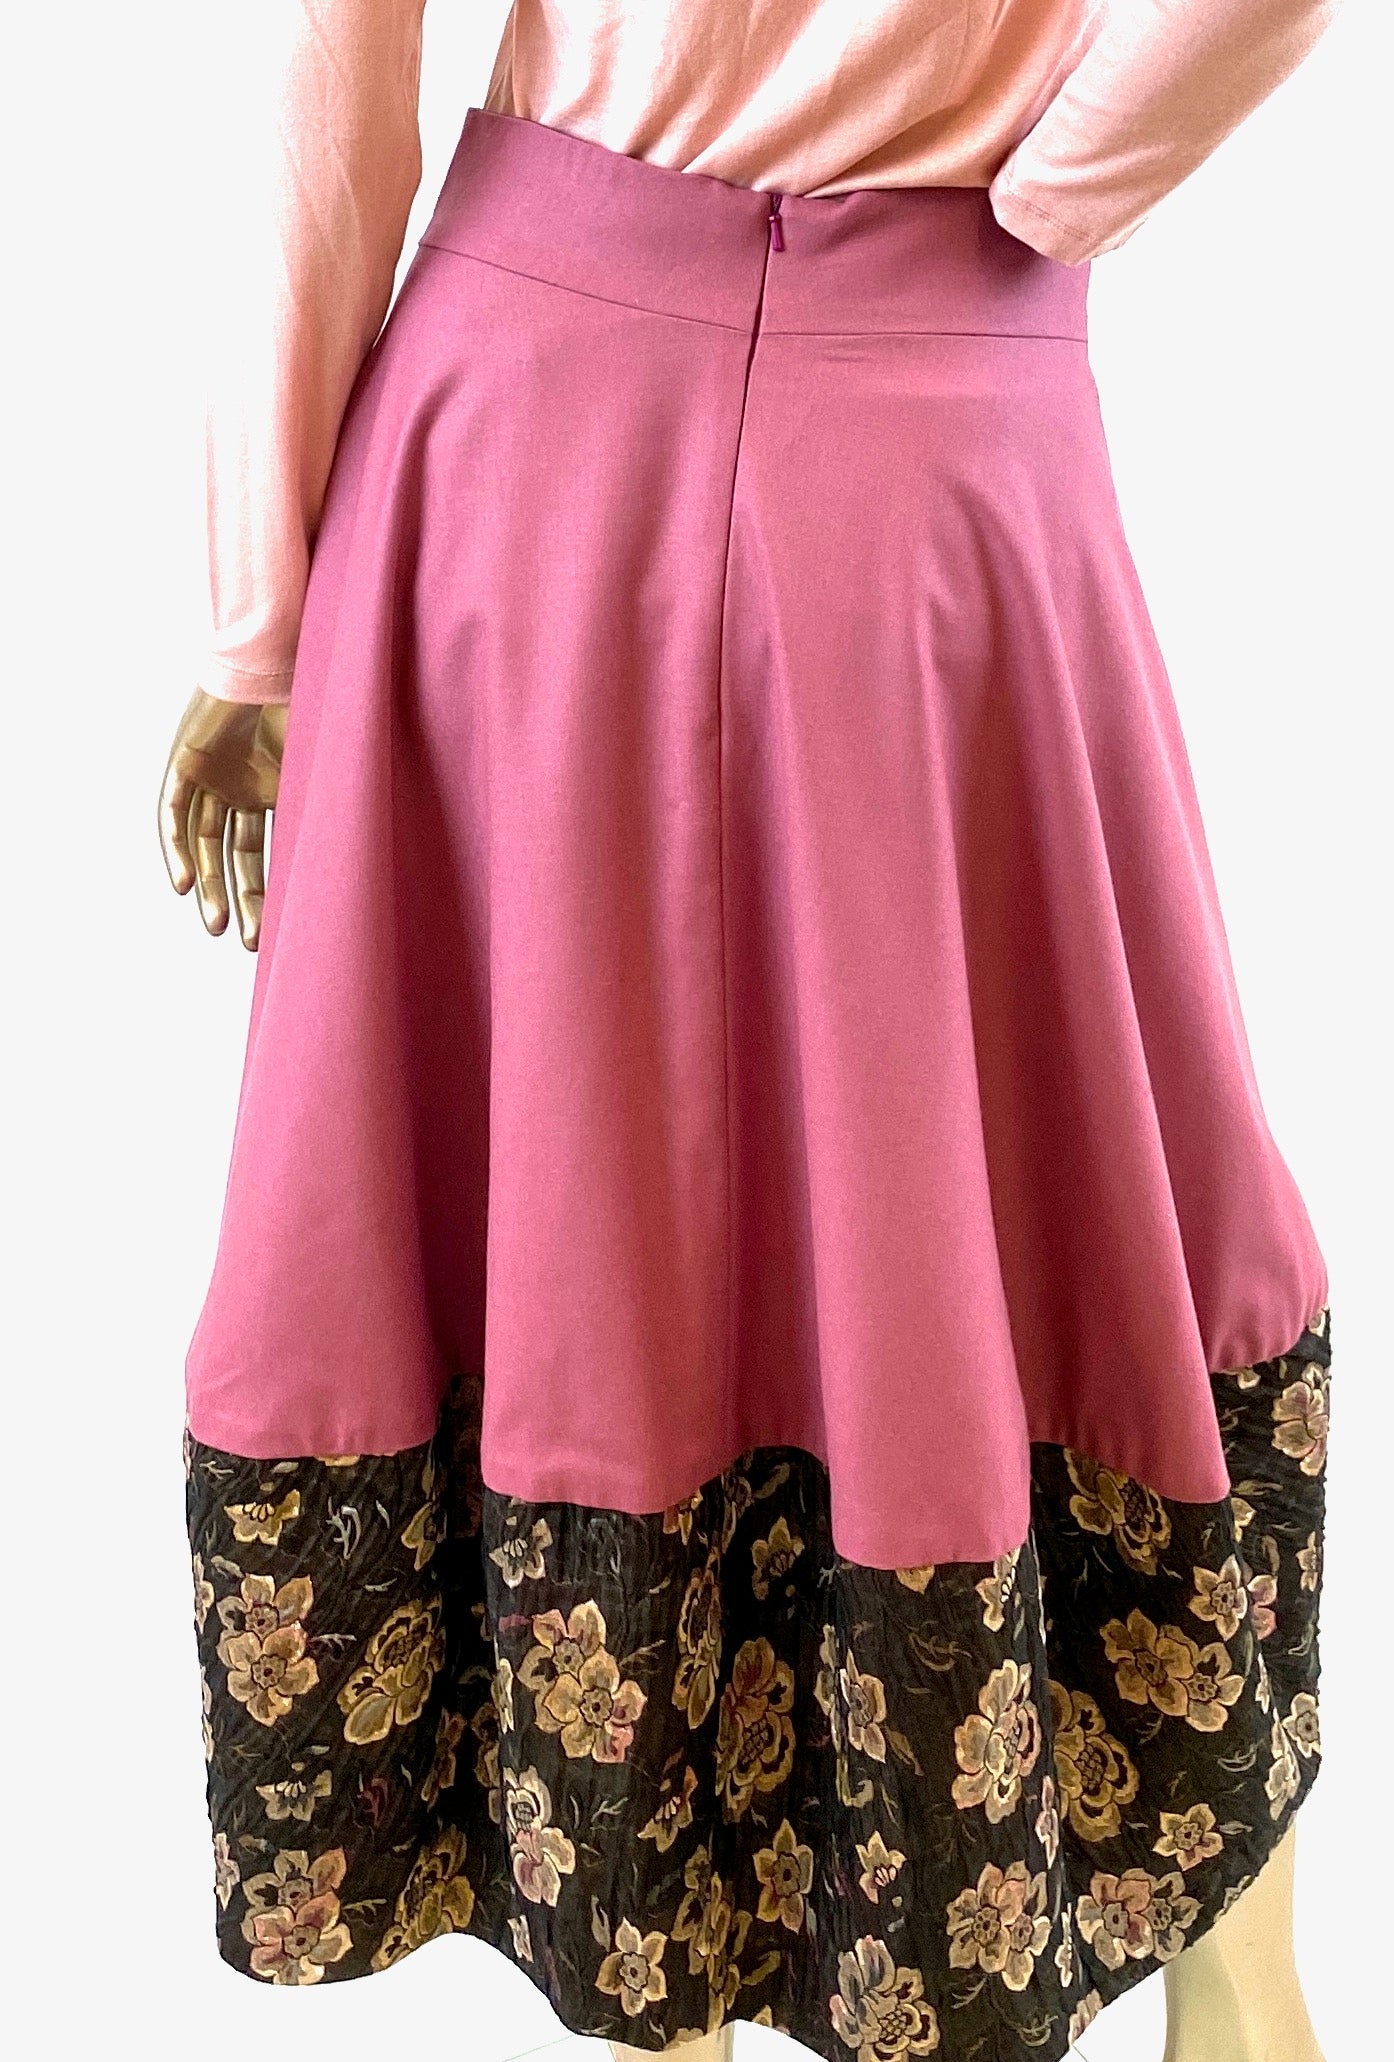 Bubble style/Tulip skirt made with wool /cshmire blend & brocade panel